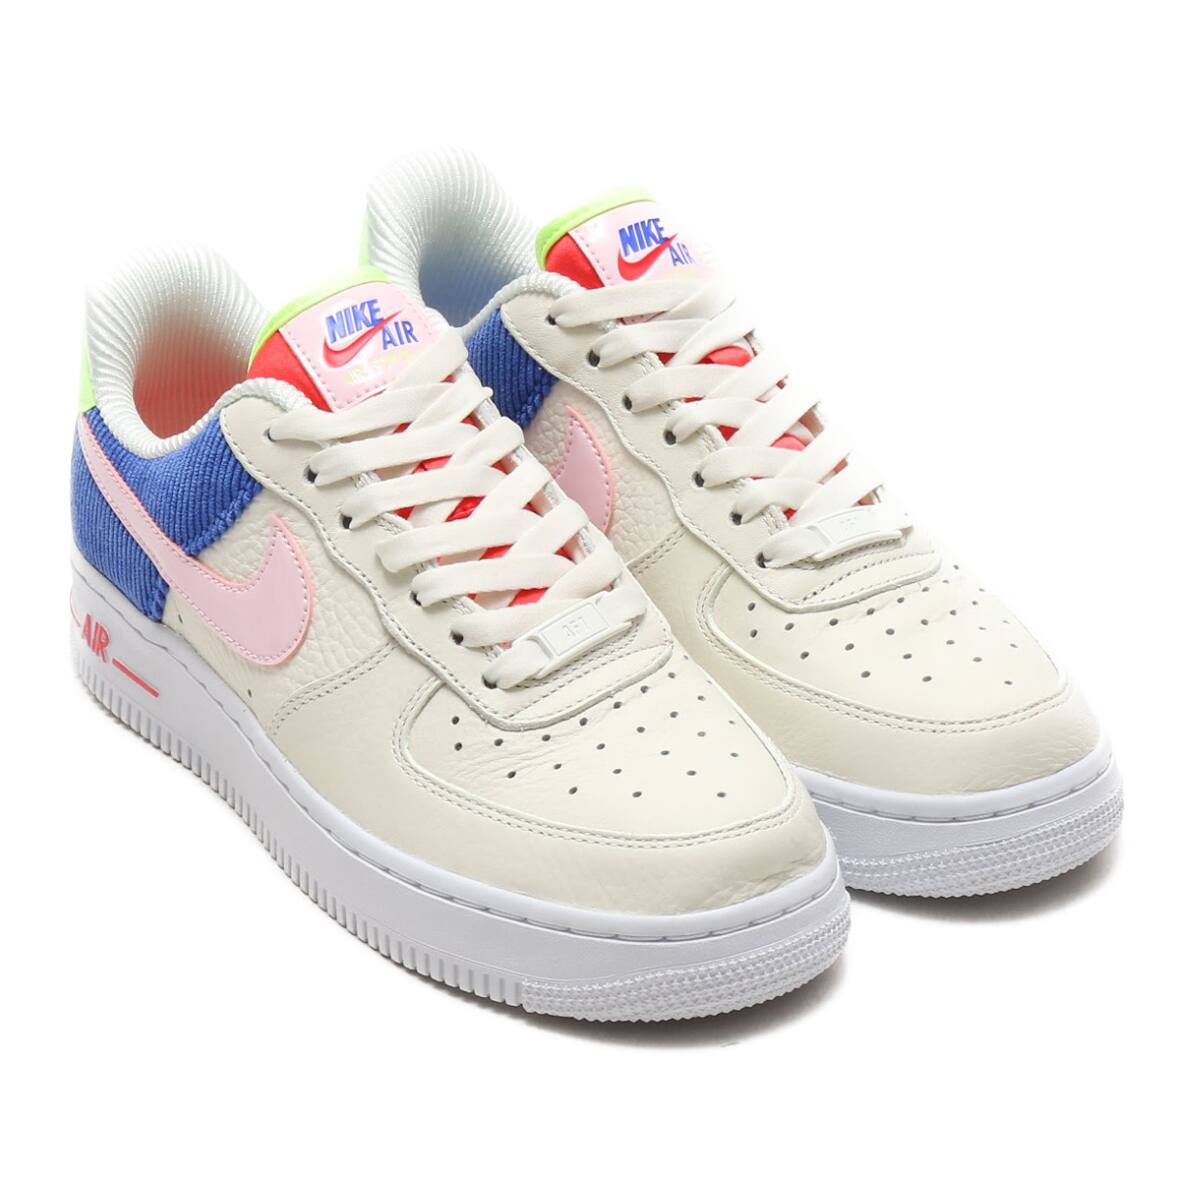 air force one sail arctic pink racer blue